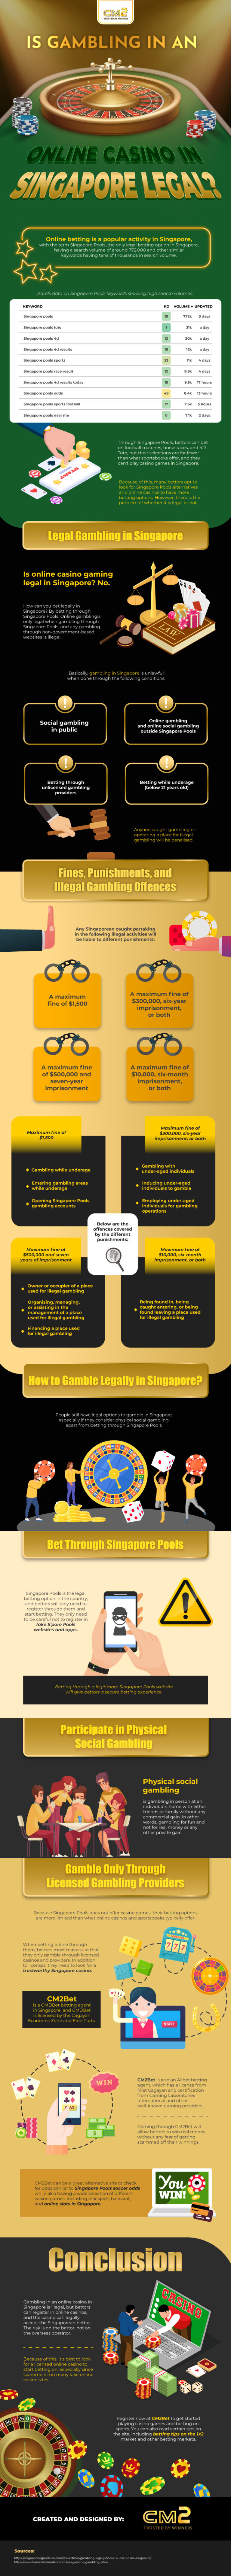 Is Gambling in an Online Casino in Singapore Legal?